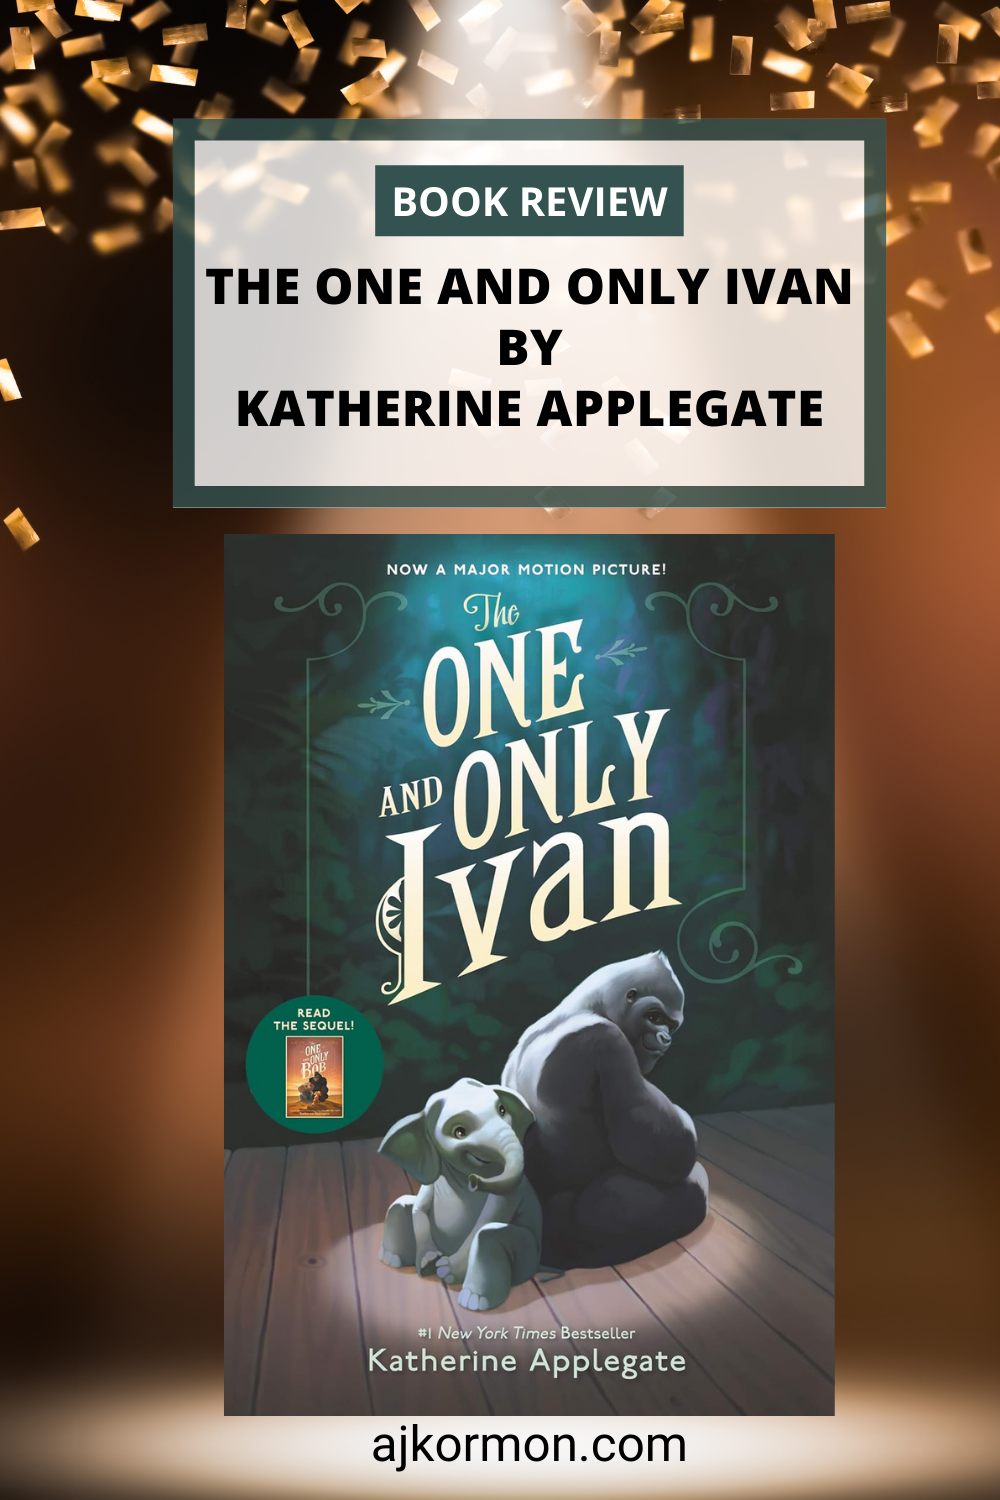 Book Review of The One and Only Ivan by Katherine Applegate